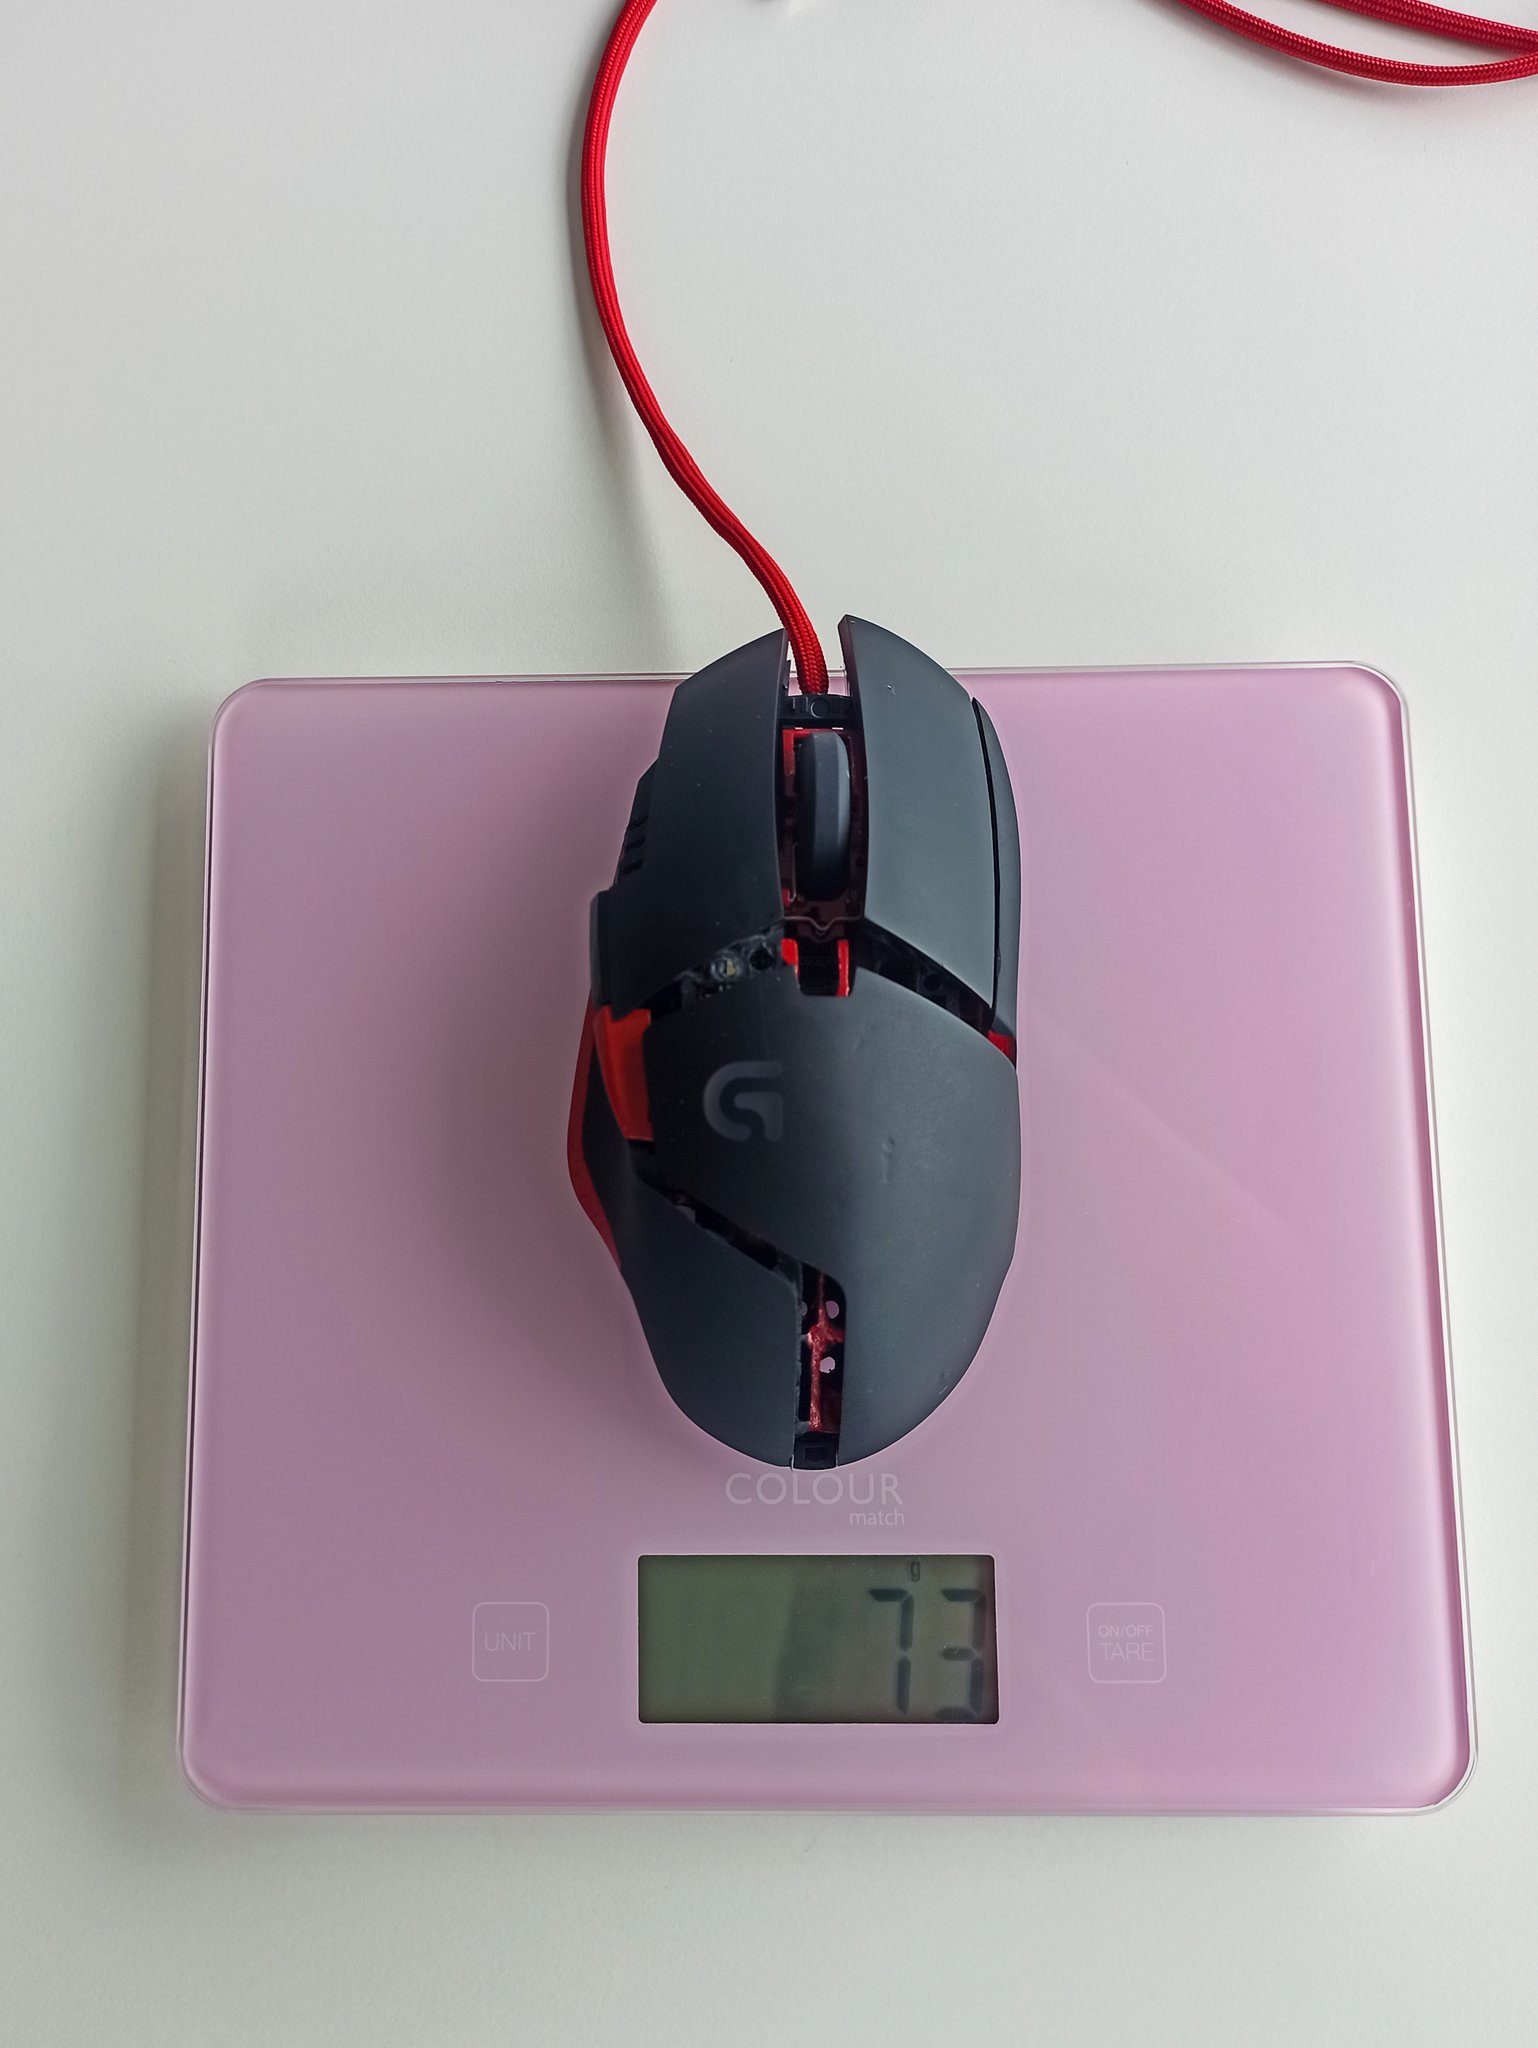 Feather Mods Twitter: "Logitech G402 weight reduction/paint/paracable Mod with no external holes - 73g without cable - 93g with cable https://t.co/sEQn9nes3K" / Twitter